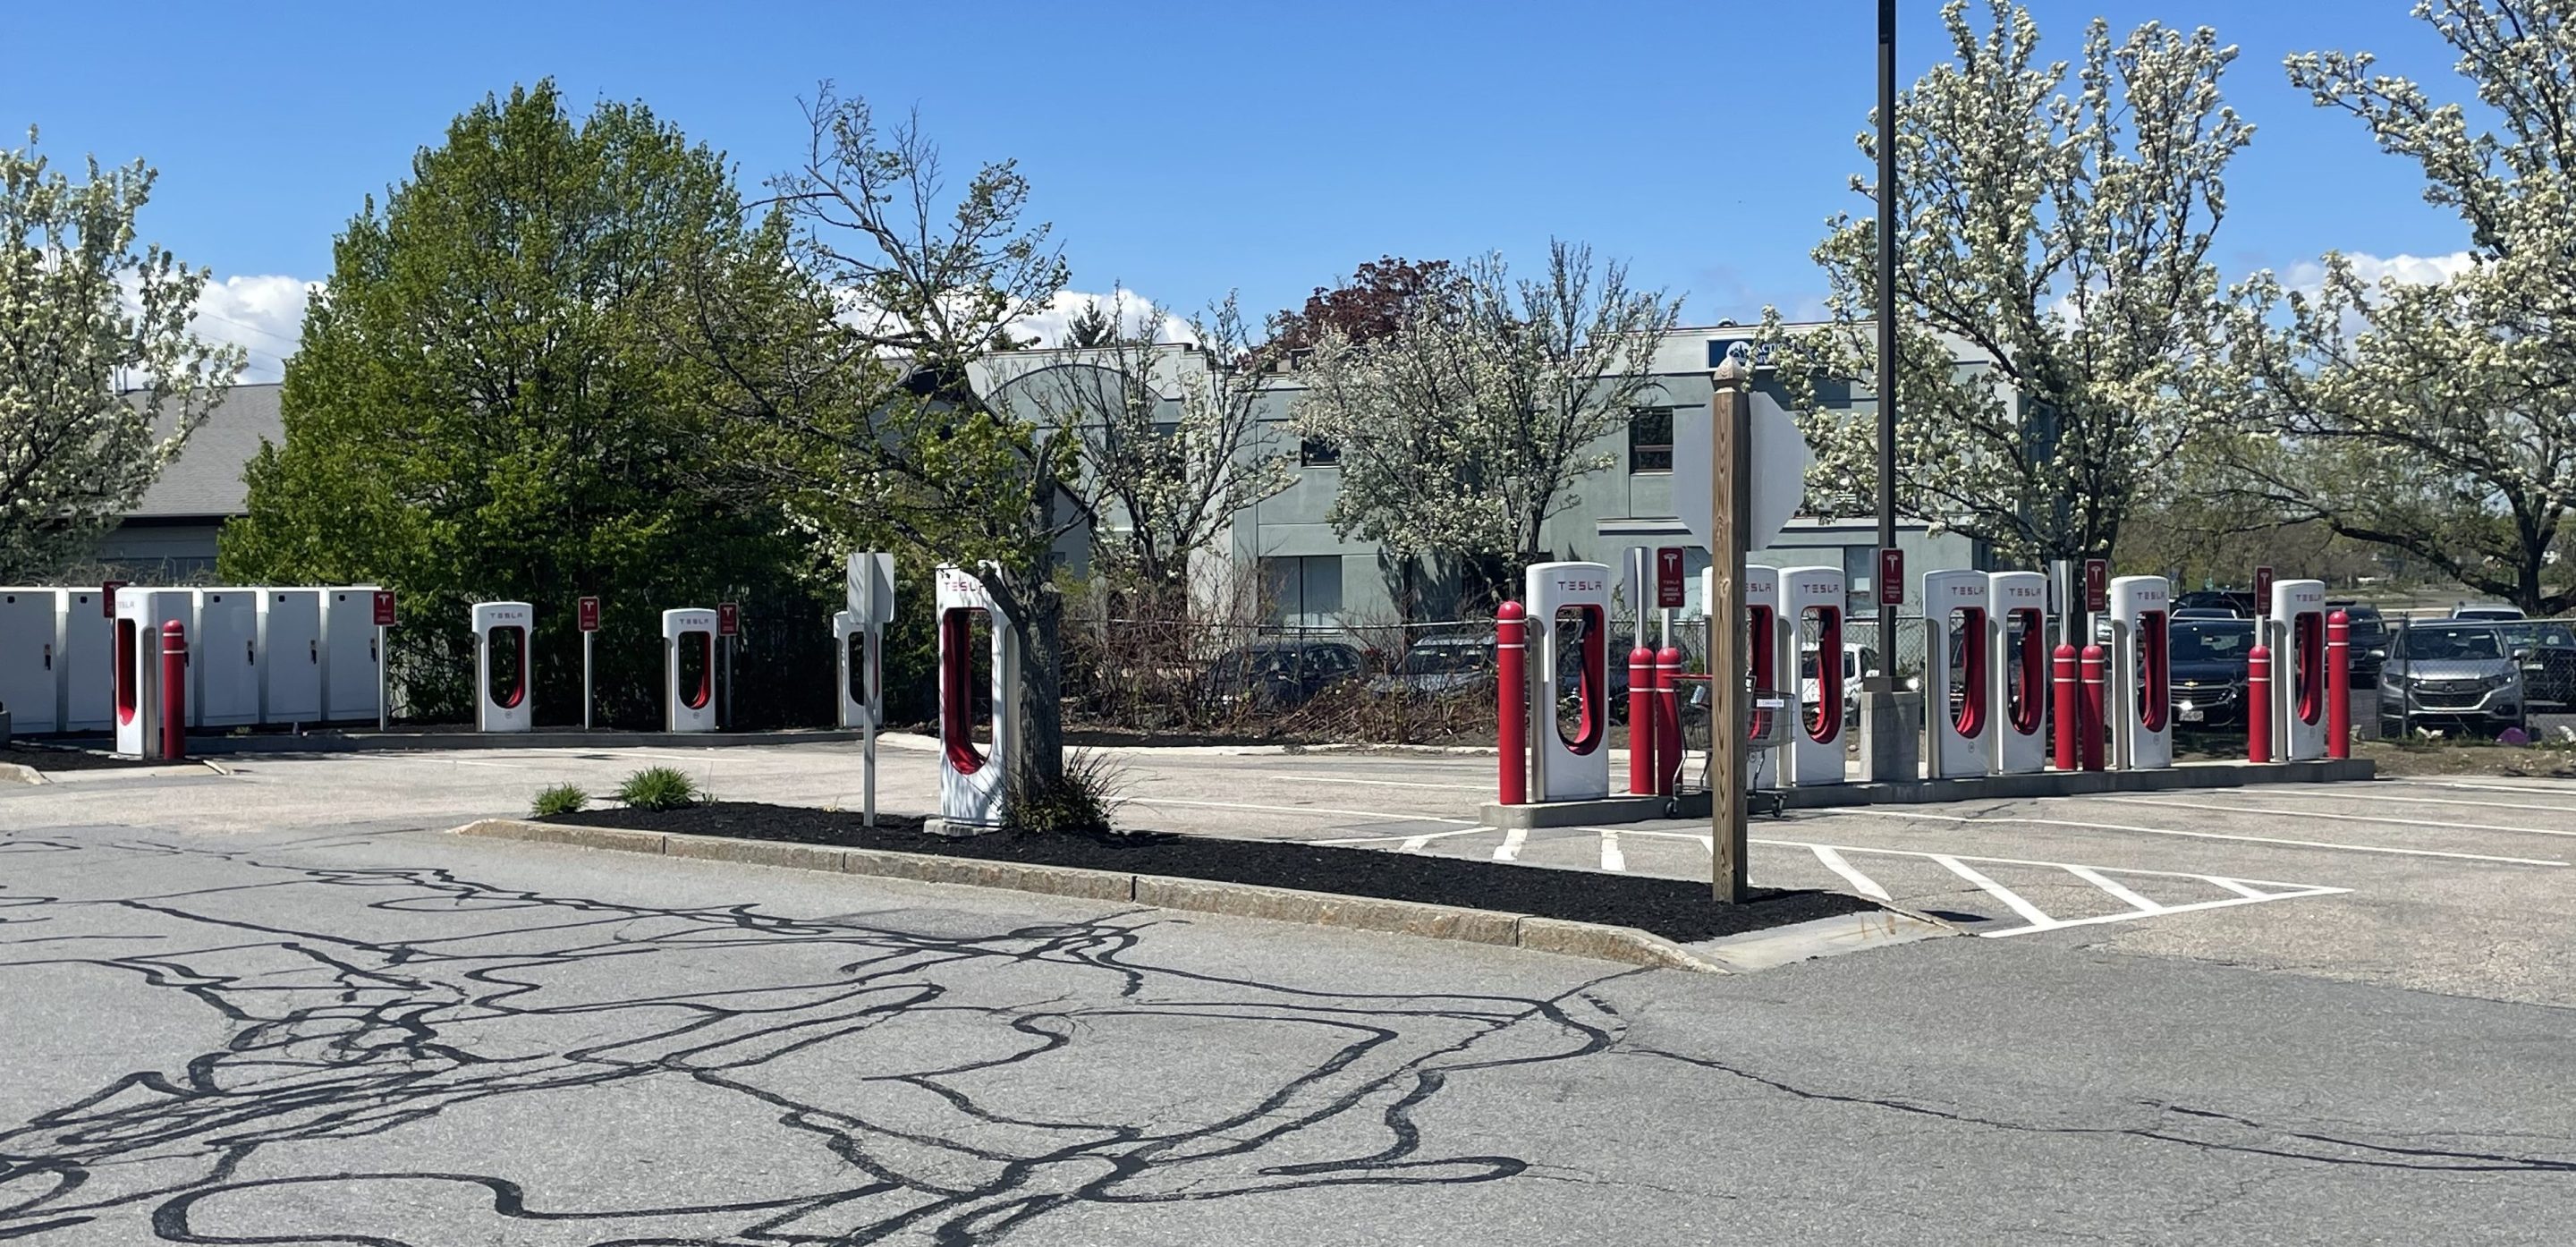 An empty parking lot under a clear blue sky with about a dozen red-and-white Tesla charging stations. Beyond the parking lot are several trees blossiming with spring blooms.